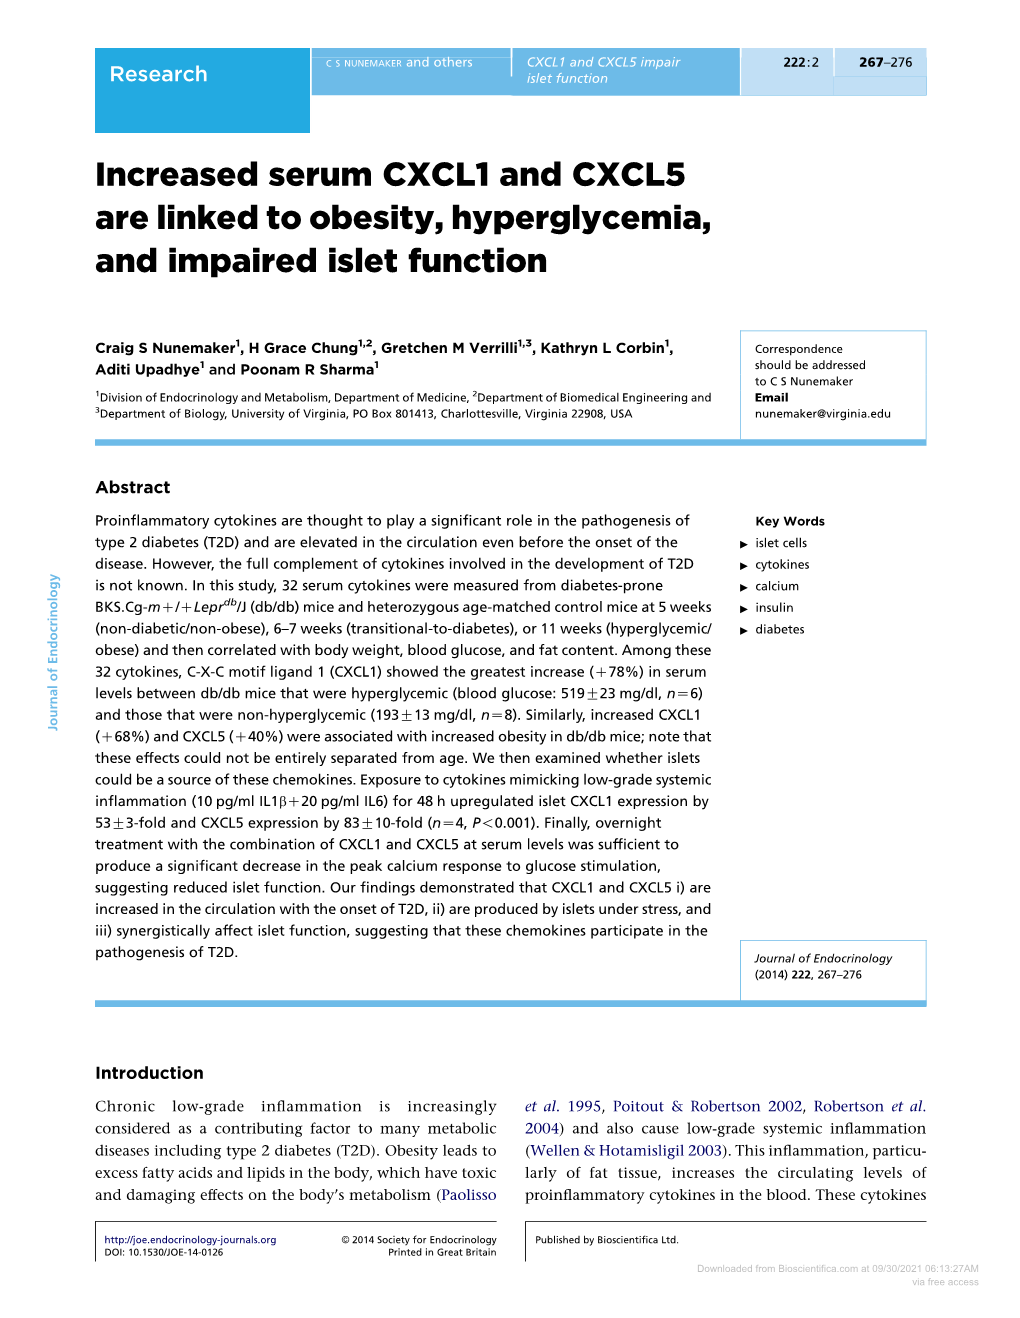 Increased Serum CXCL1 and CXCL5 Are Linked to Obesity, Hyperglycemia, and Impaired Islet Function